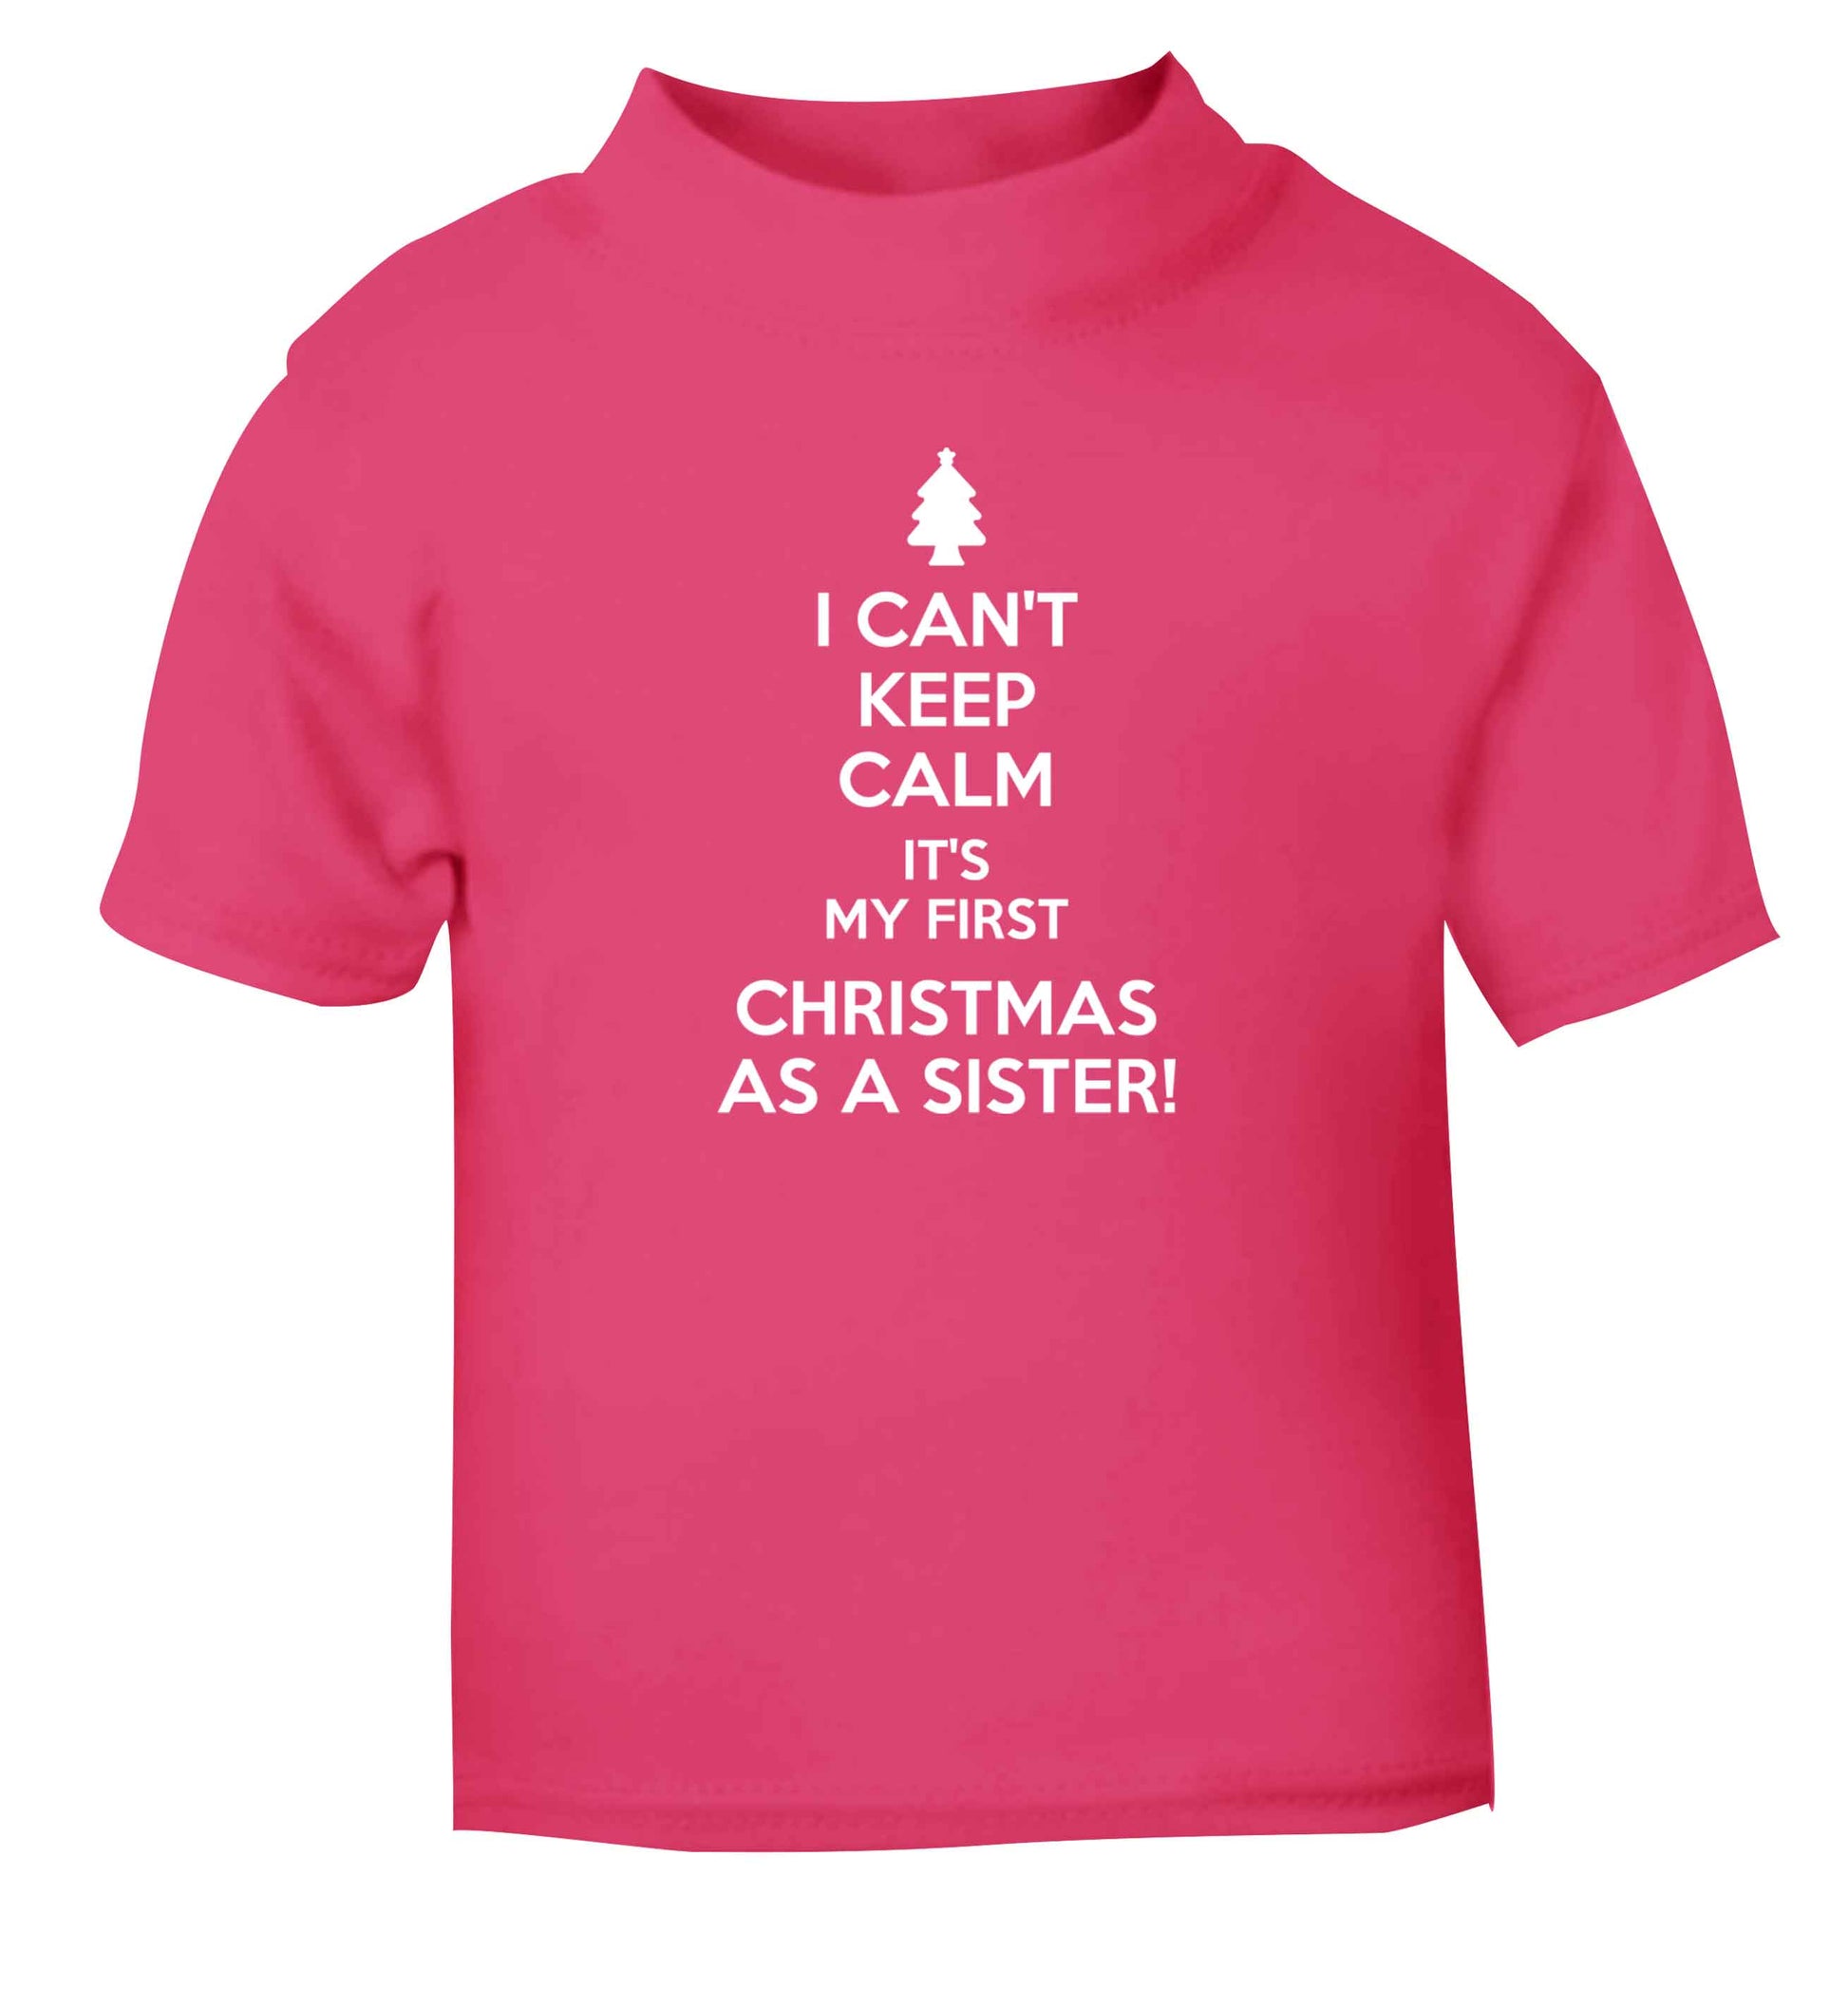 I can't keep calm it's my first Christmas as a sister! pink Baby Toddler Tshirt 2 Years